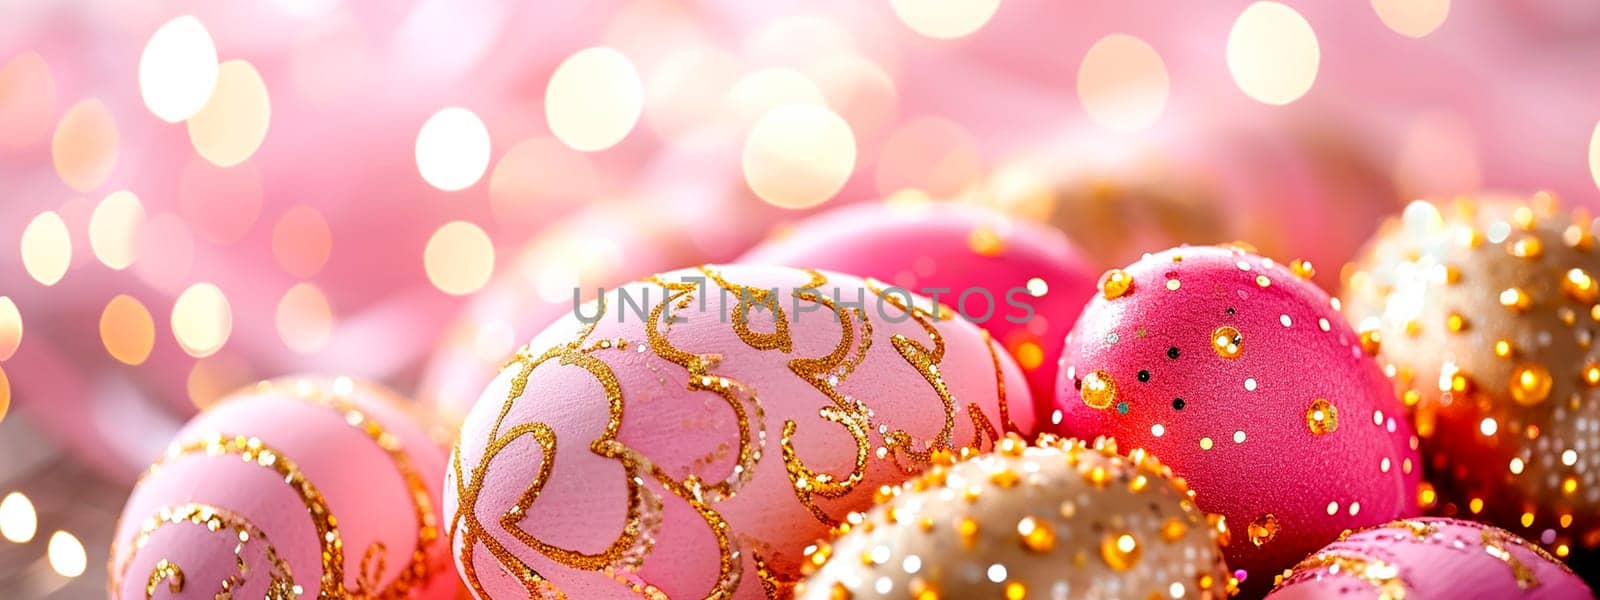 Golden eggs on a shiny Easter background. Selective focus. Holiday.